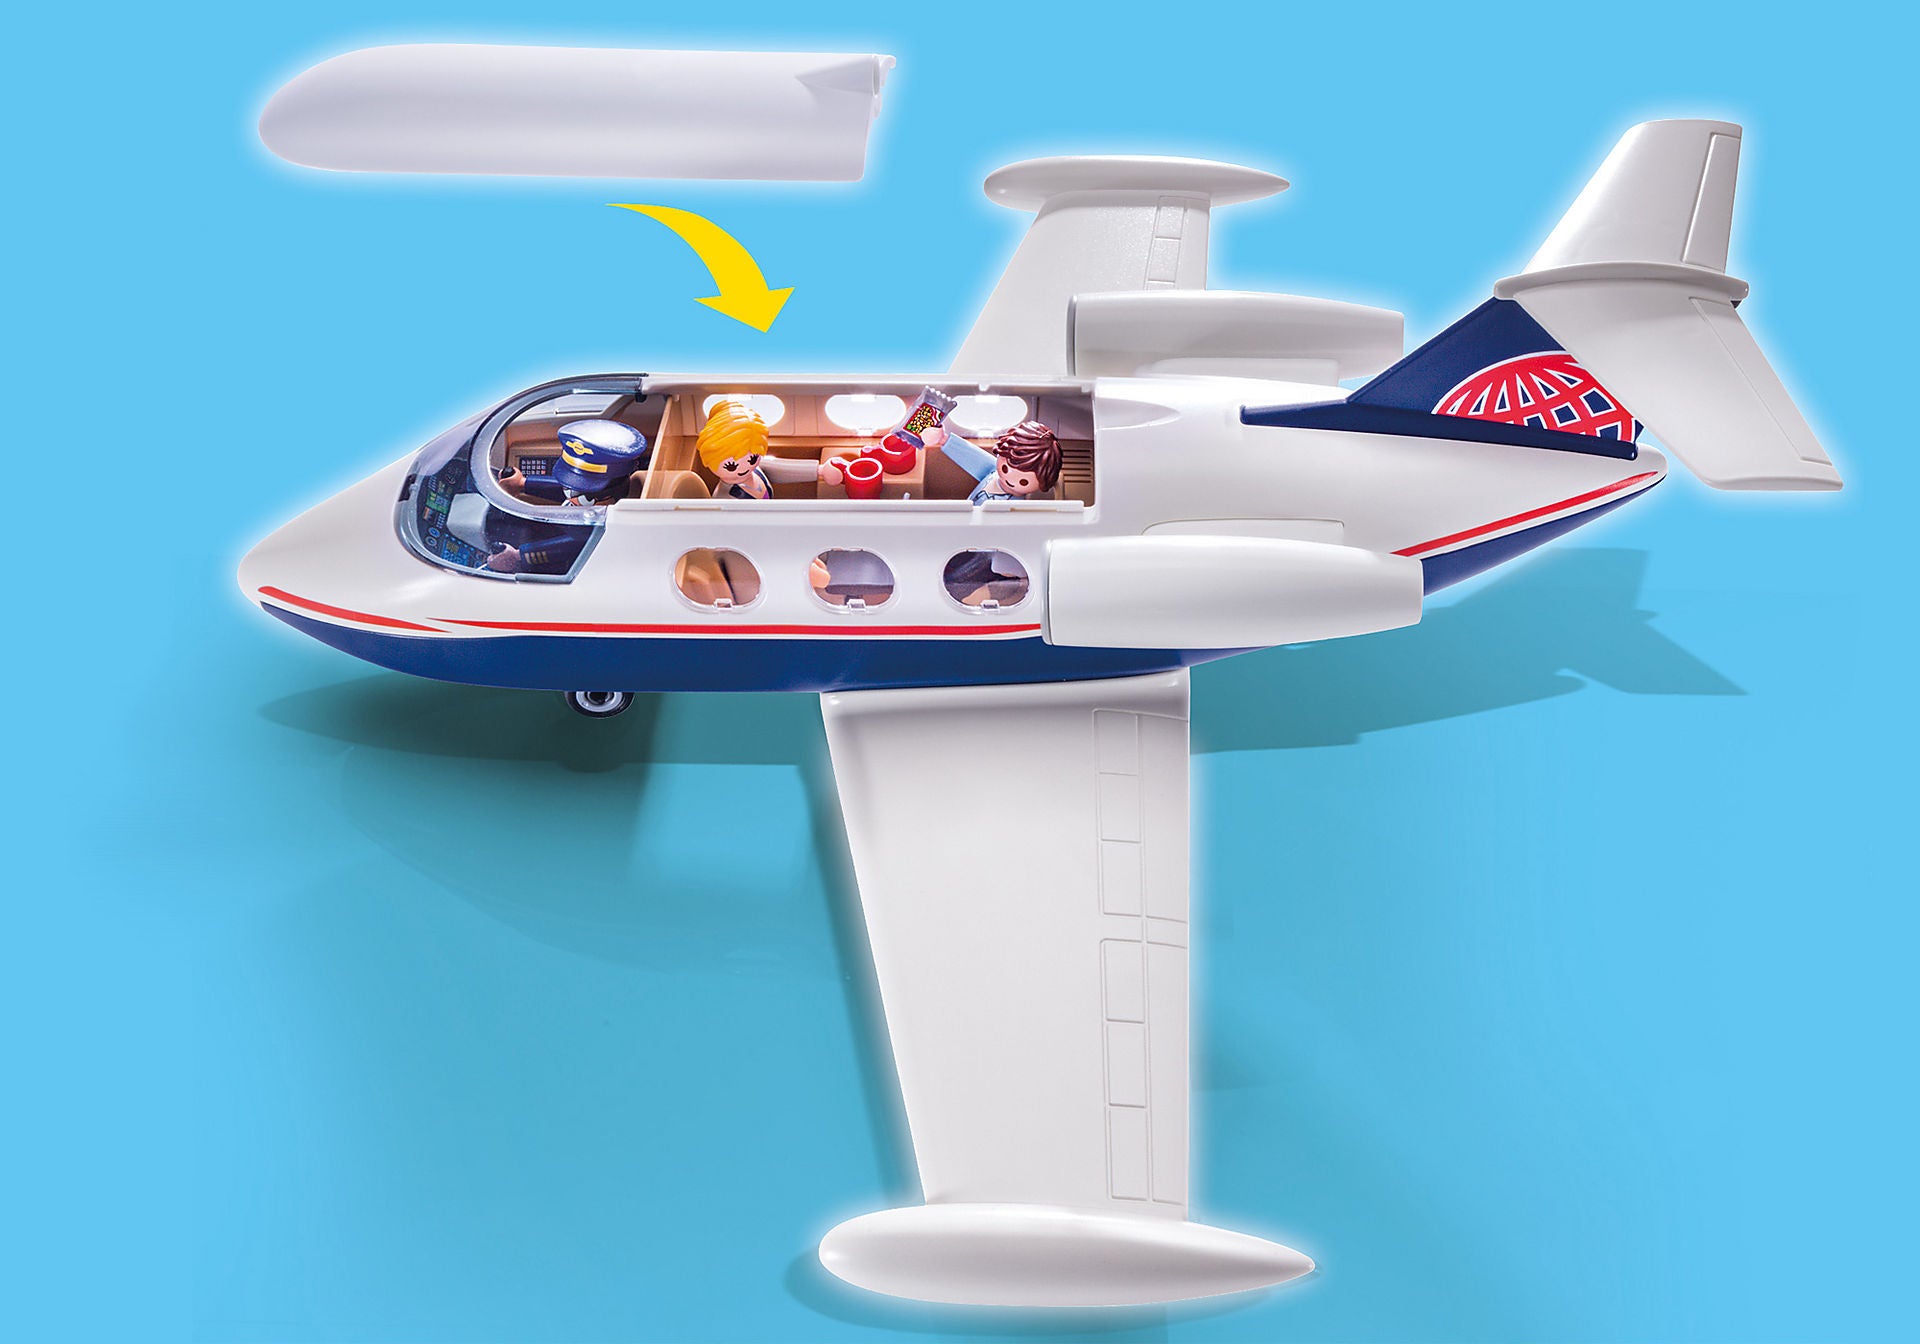 Private Jet by Playmobil #70533